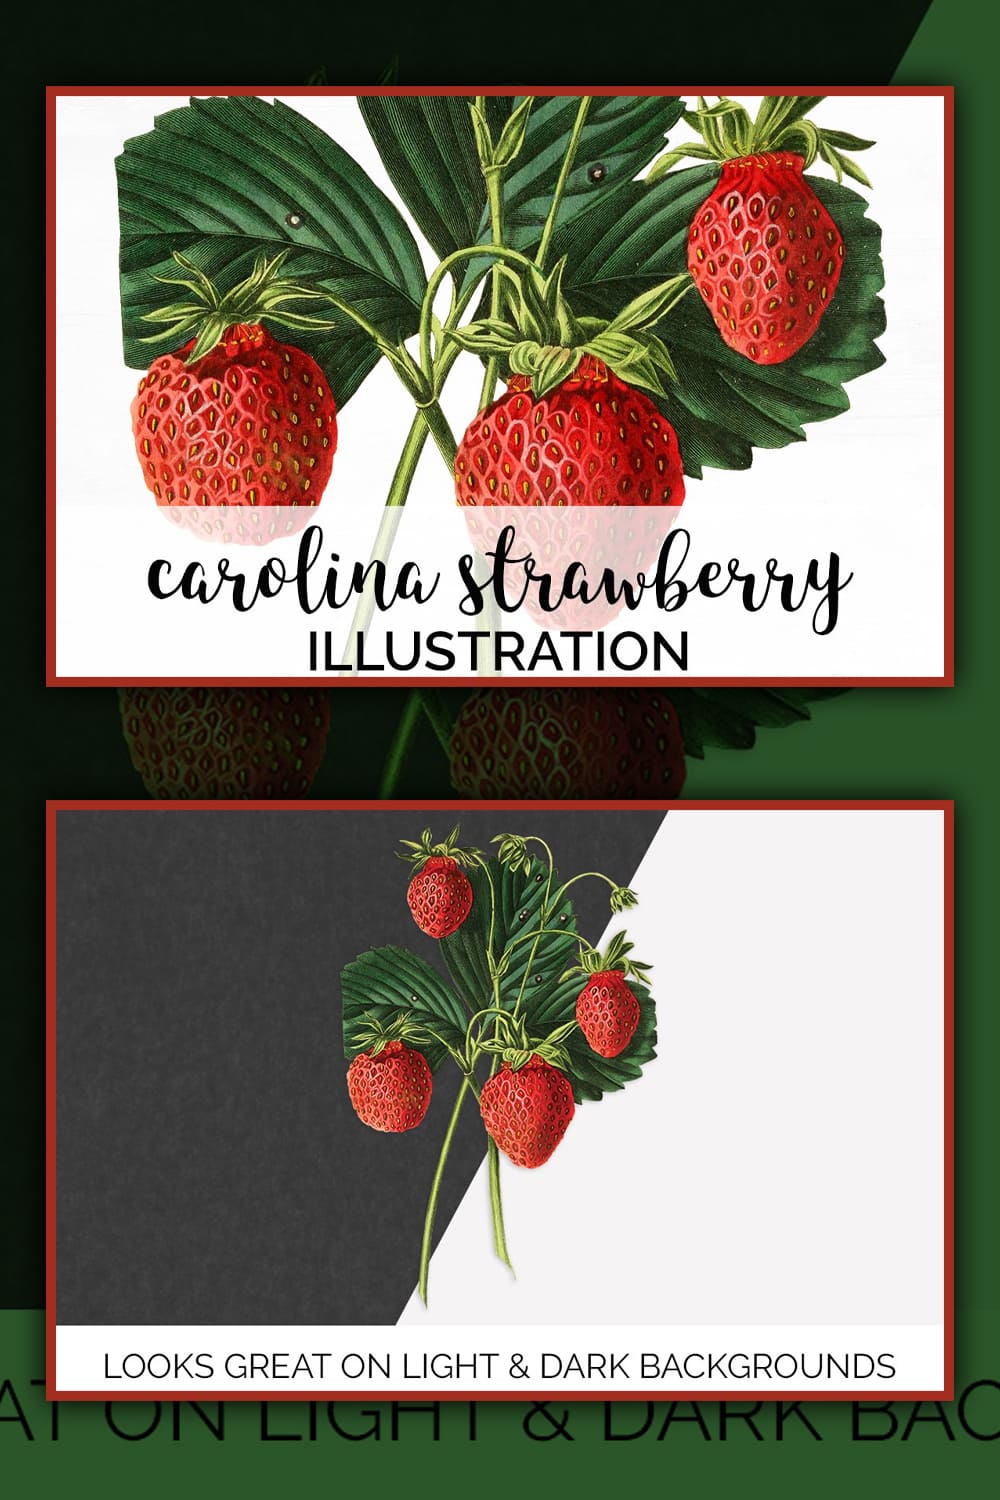 Realistic illustration of strawberries with green strawberry leaves.